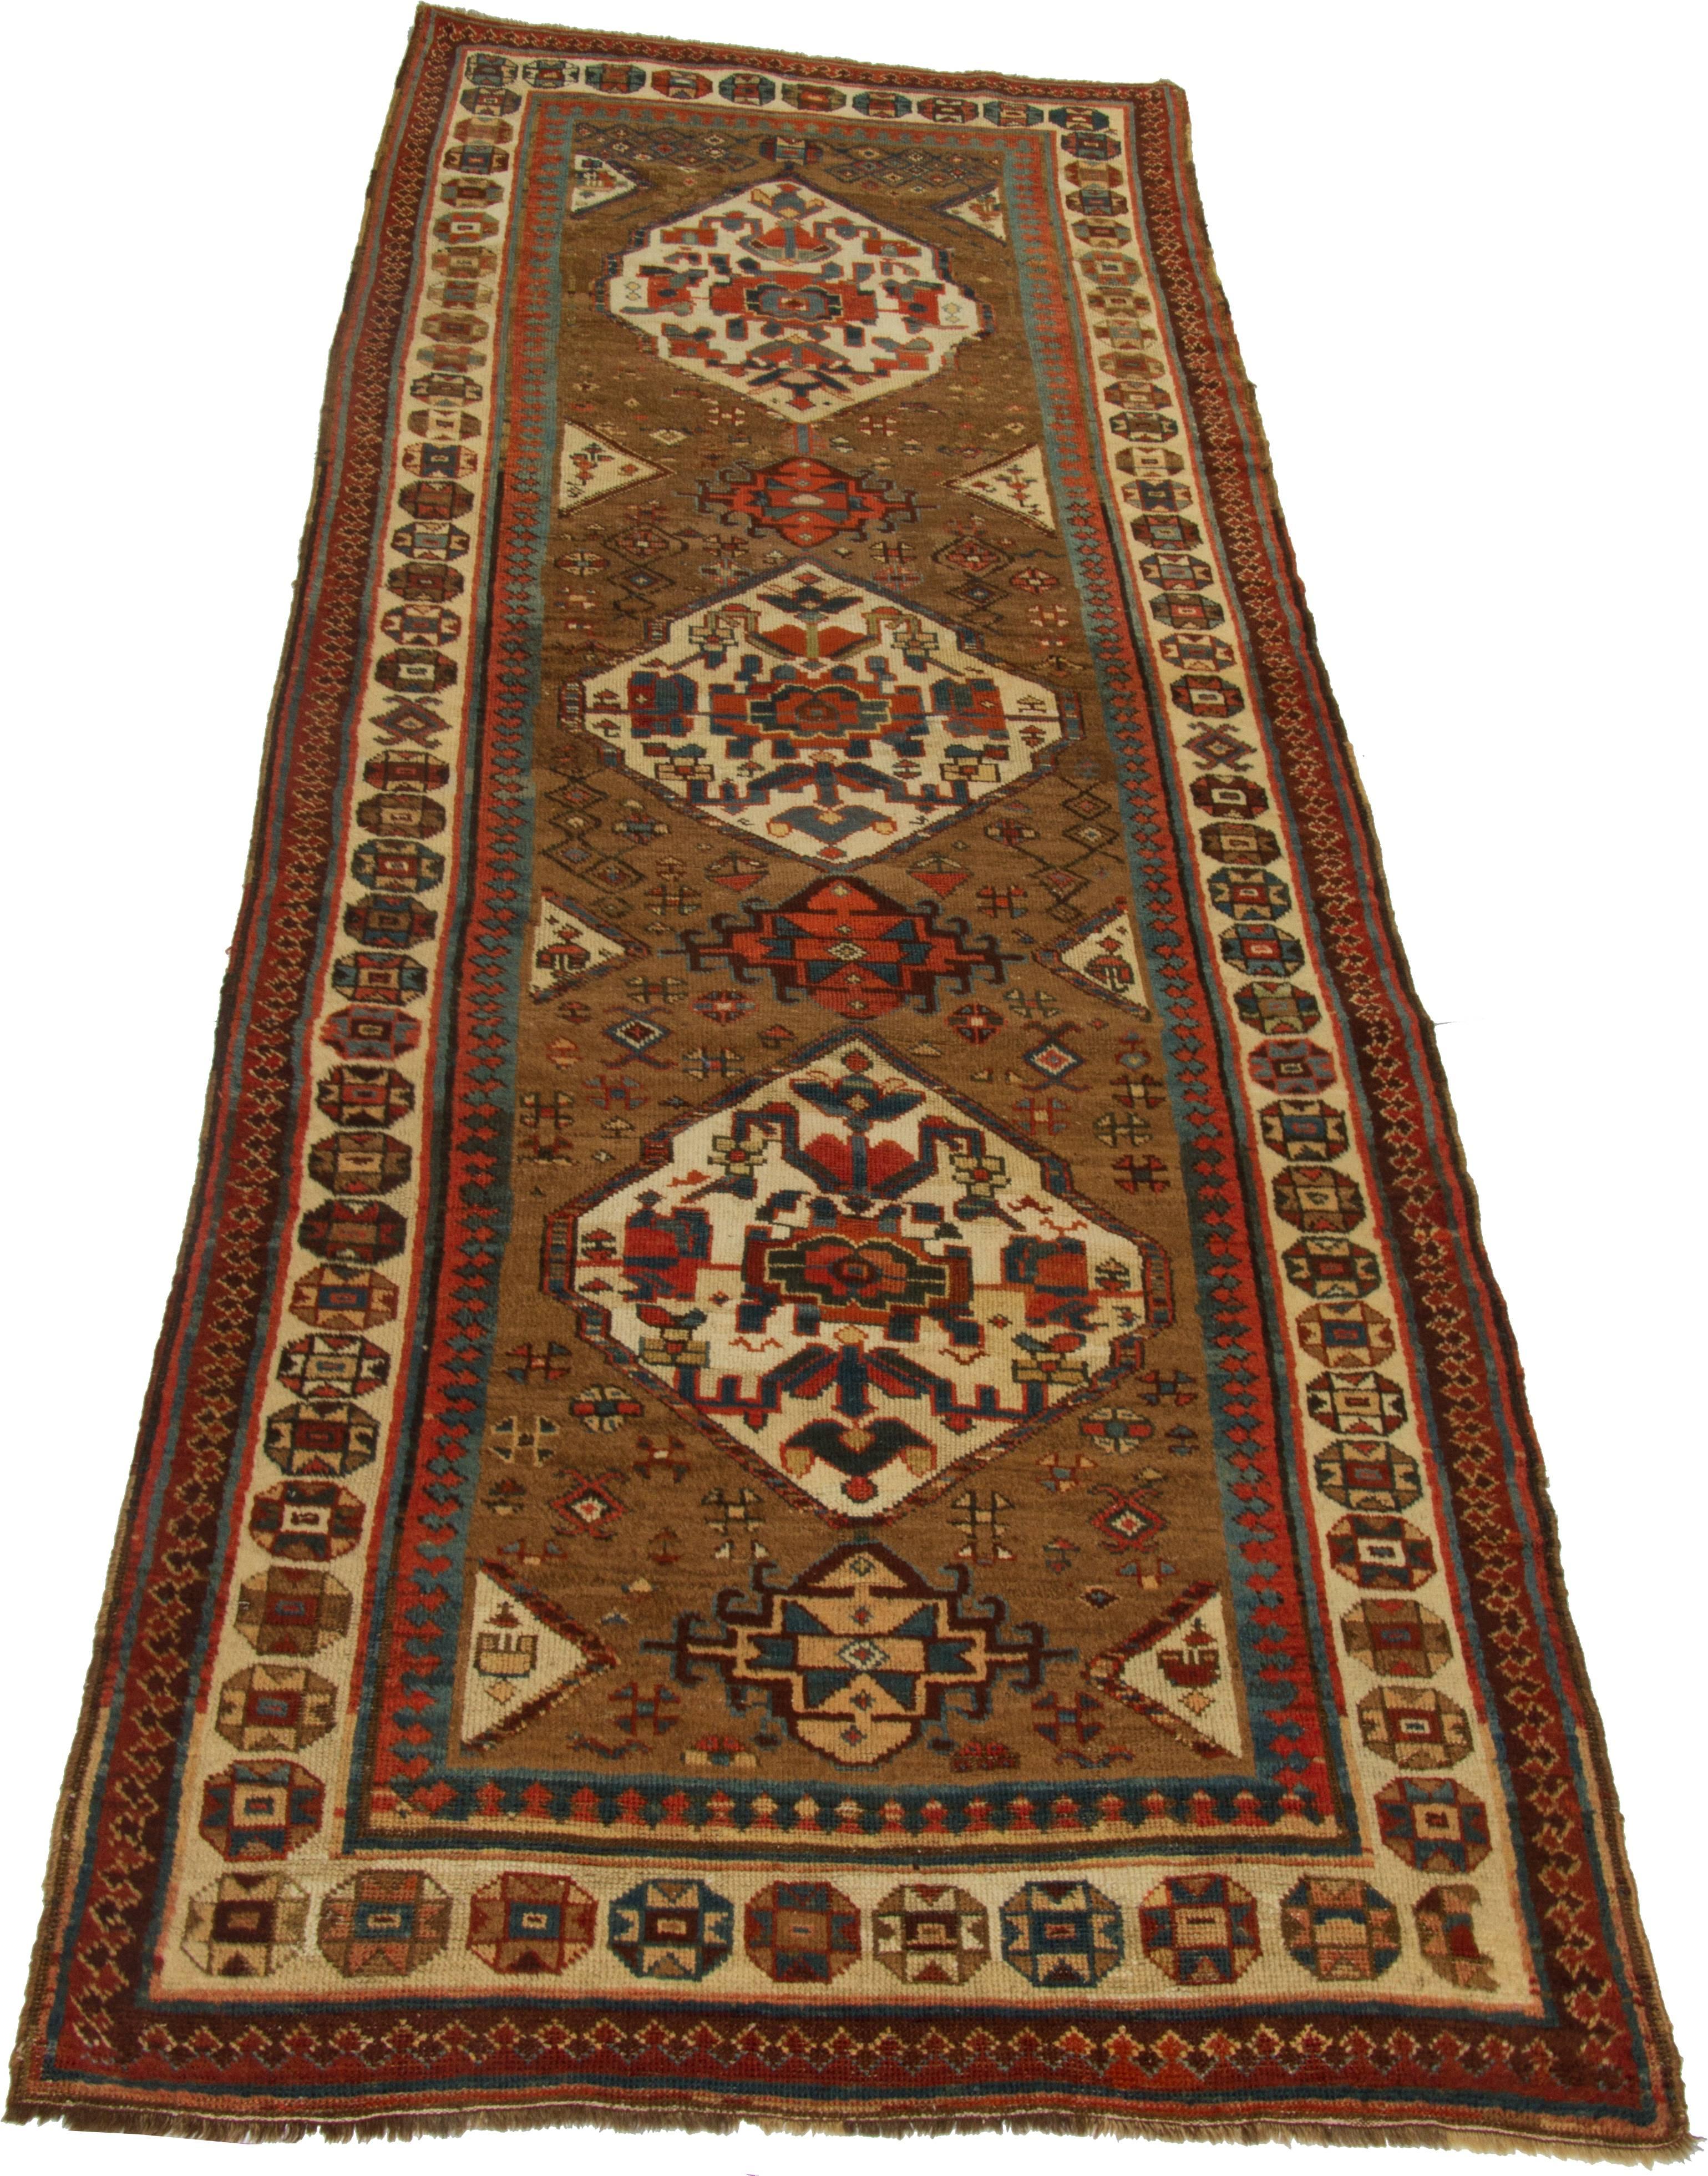 Early Twentieth Century Persian Sarab Runner In Good Condition For Sale In Chicago, IL